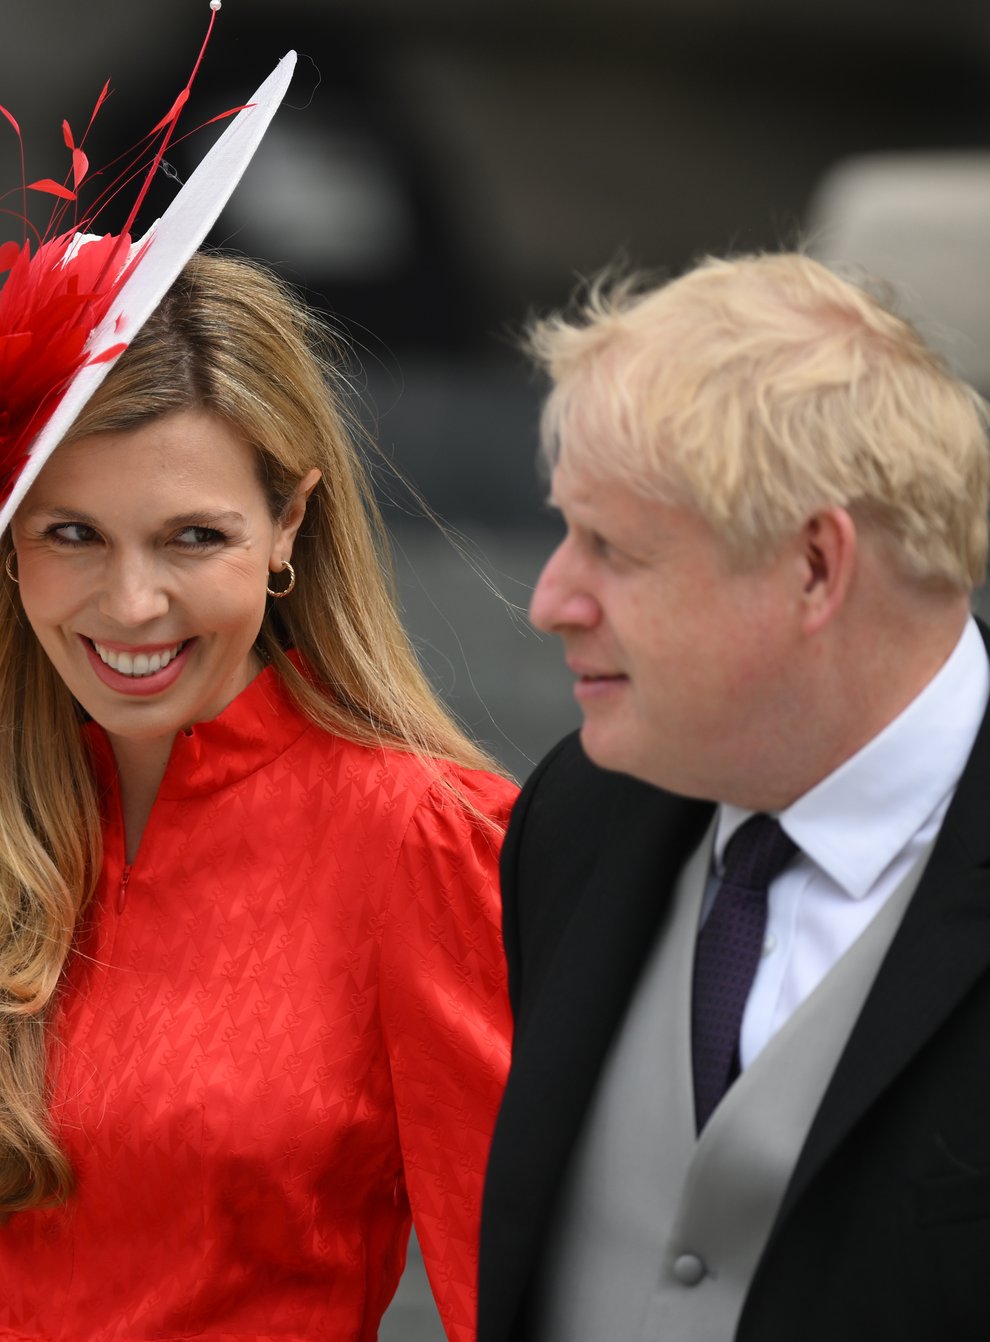 Prime Minister Boris Johnson and wife Carrie Johnson at the National Service of Thanksgiving at St Paul’s Cathedral, London, on day two of the Platinum Jubilee celebrations for Queen Elizabeth II. Picture date: Friday June 3, 2022.